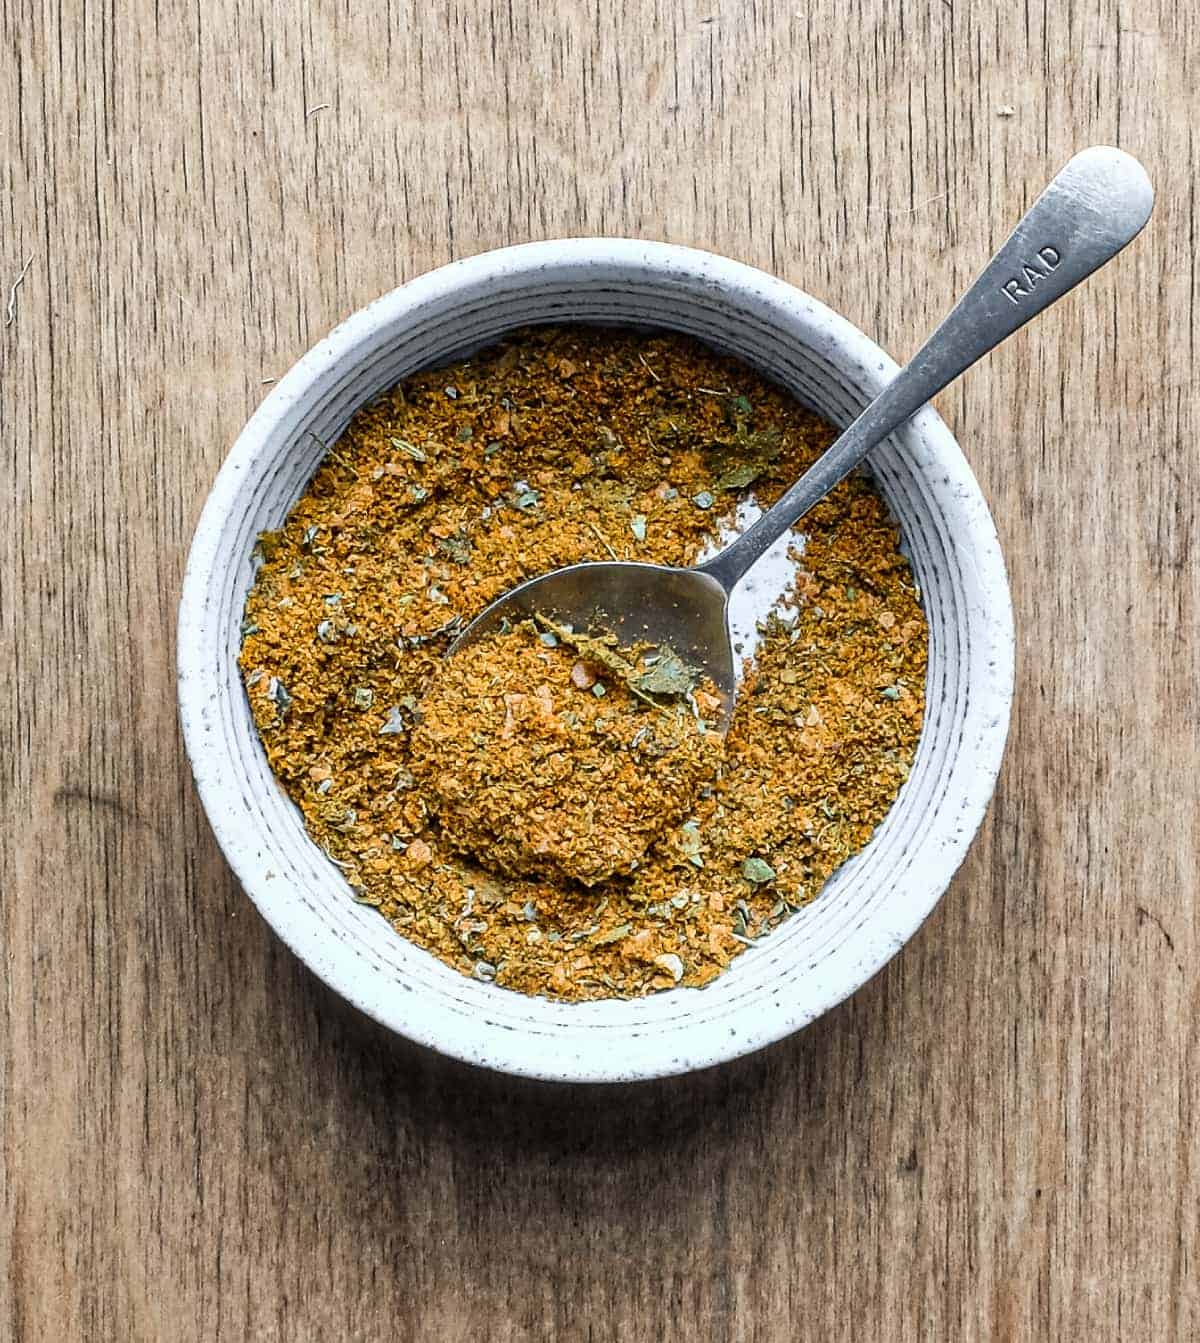 A small bowl with a spoon containing Indian gunpowder spice mix.